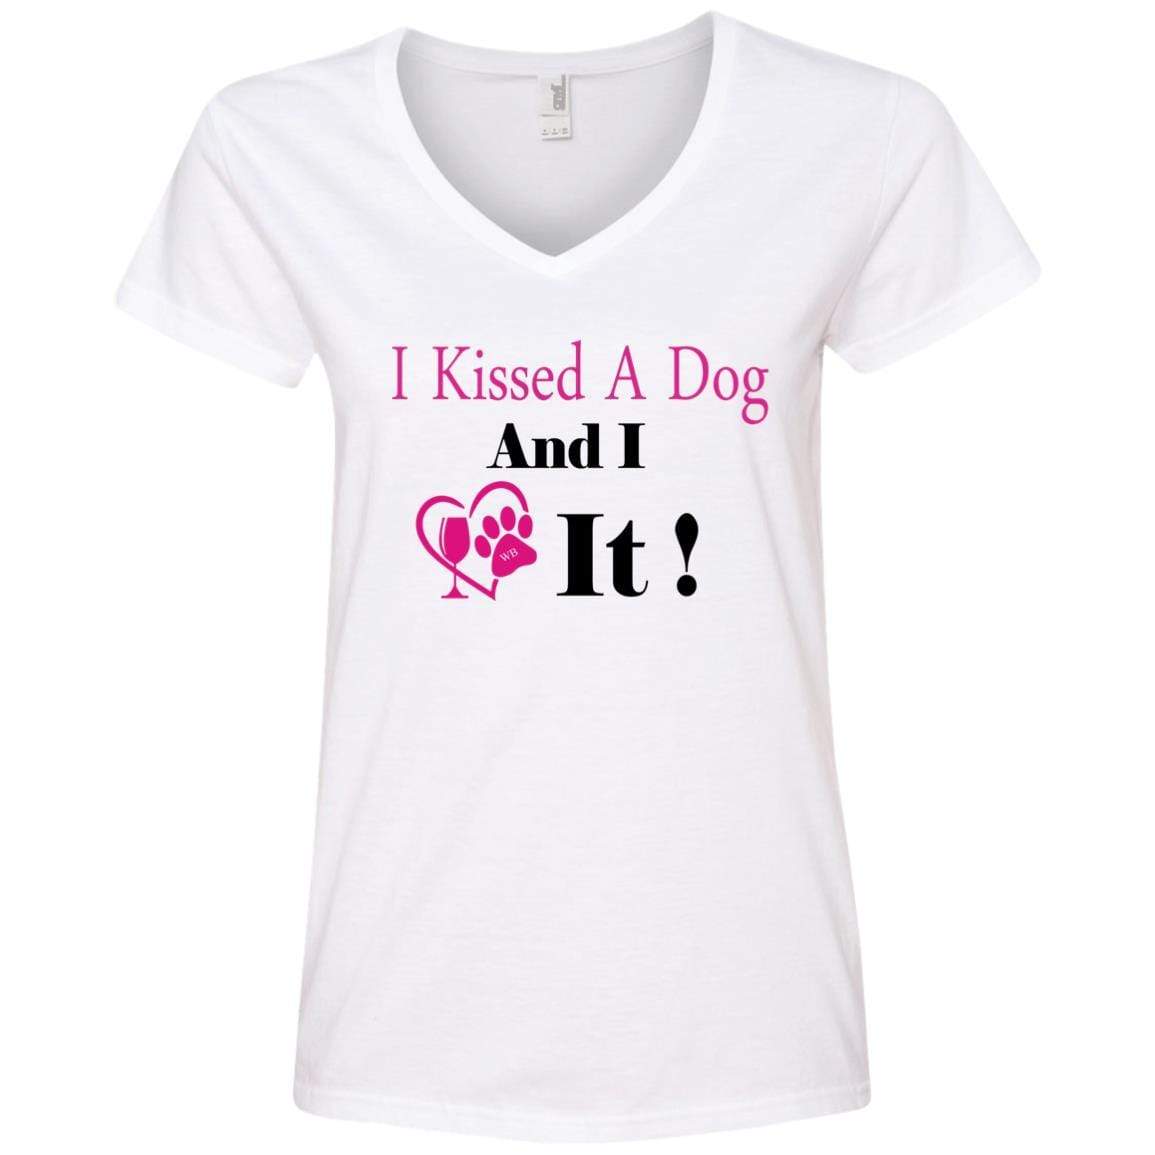 T-Shirts White / S WineyBitches.co "I Kissed A Dog And I Loved It:" Ladies' V-Neck T-Shirt WineyBitchesCo